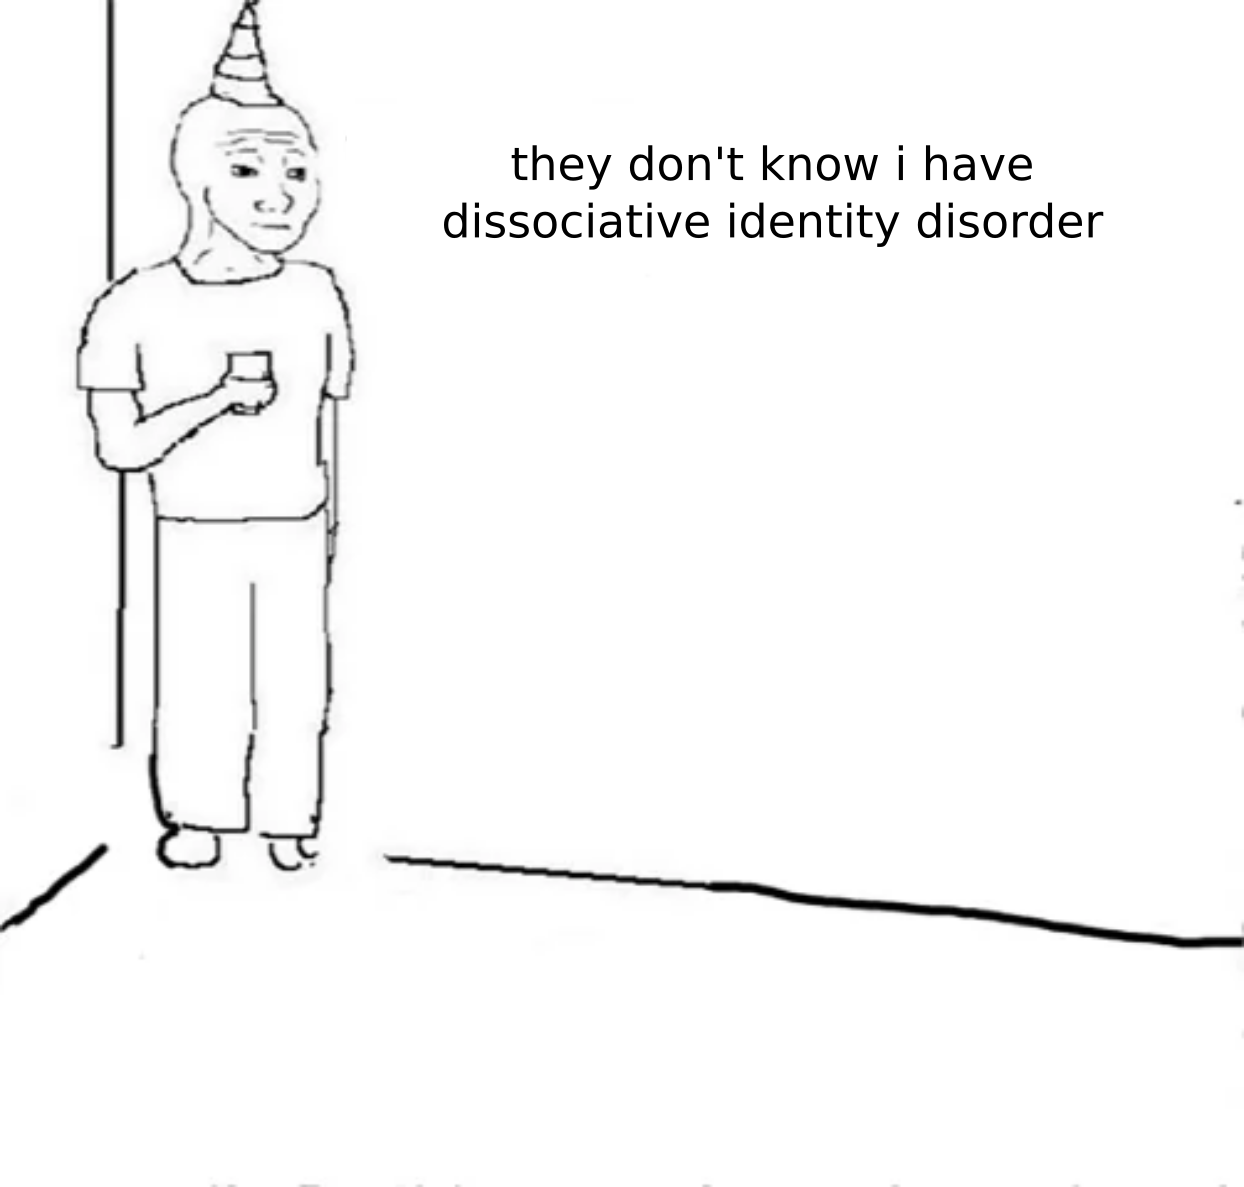 Guy in corner of party Meme 

but alone

thinking they don't know i have 
dissociative identity disorder 